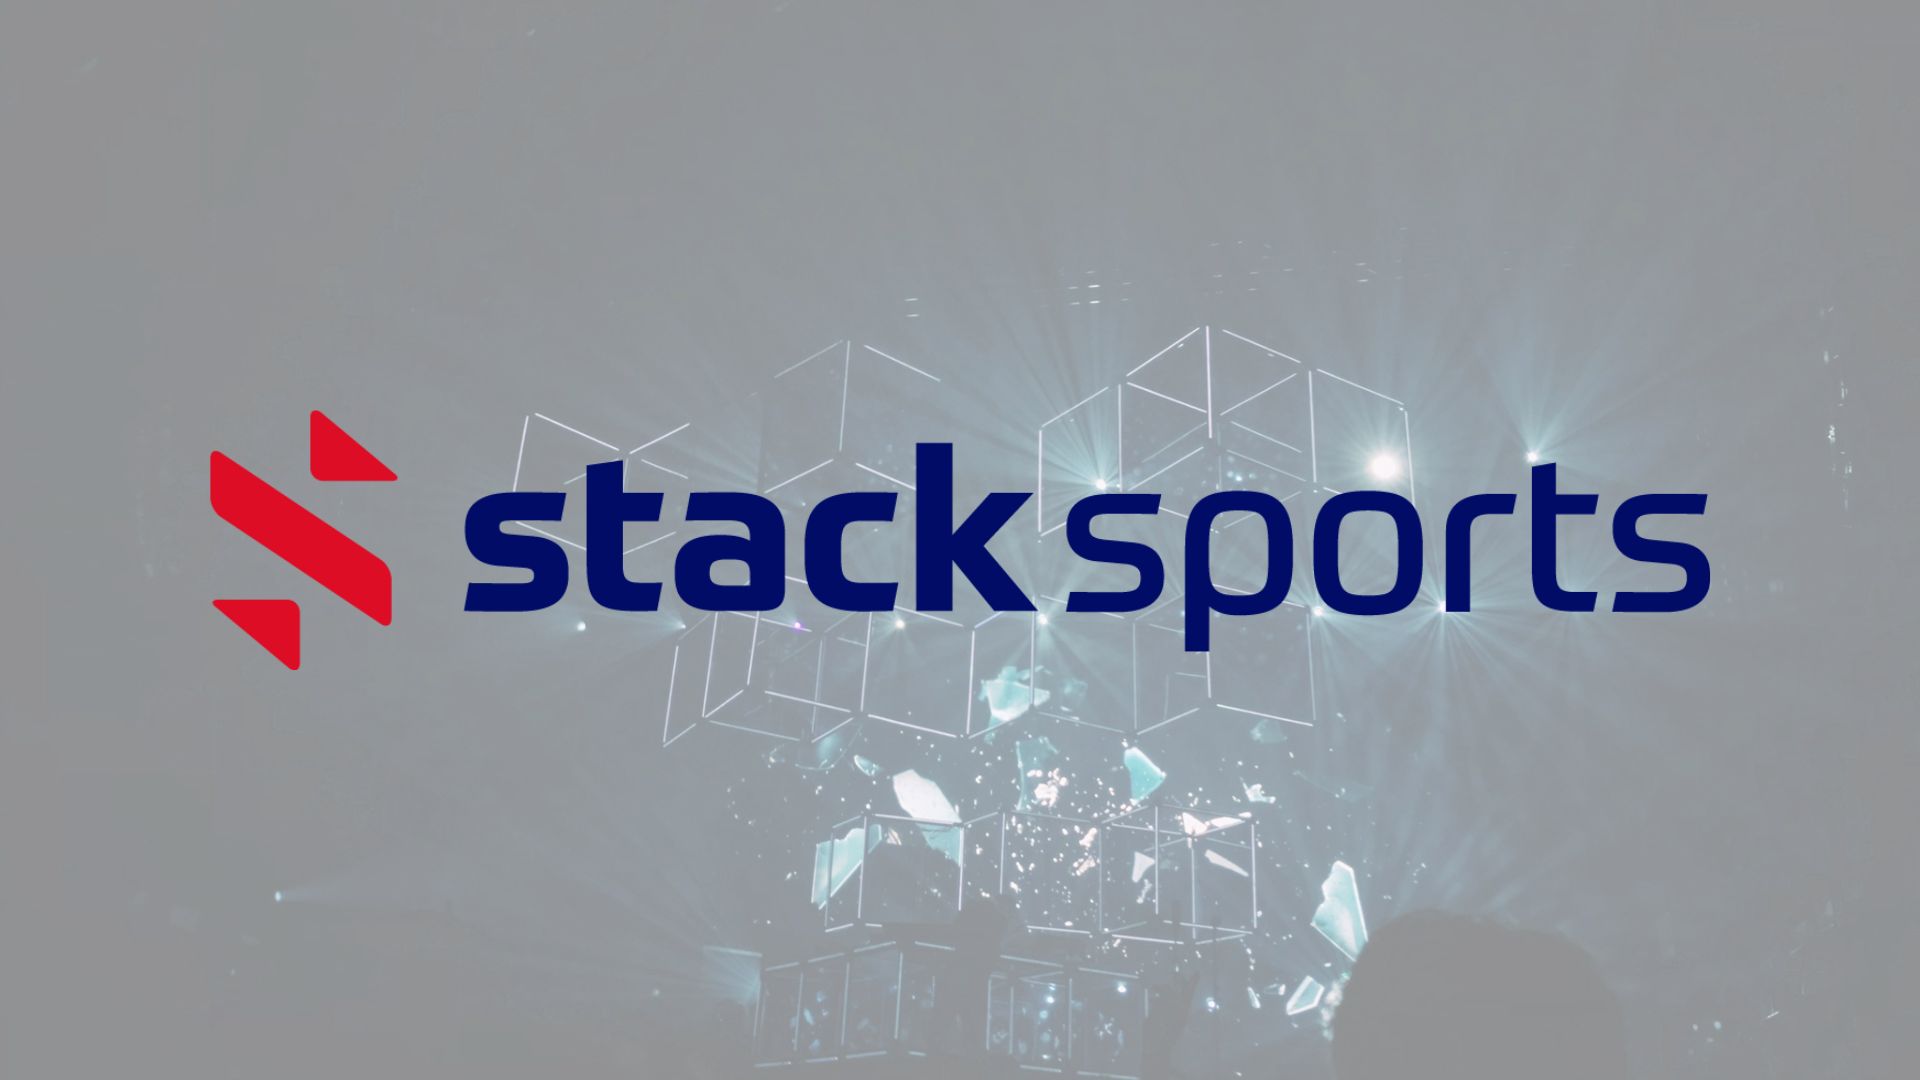 Stack Sports Introduces Stack Rewards